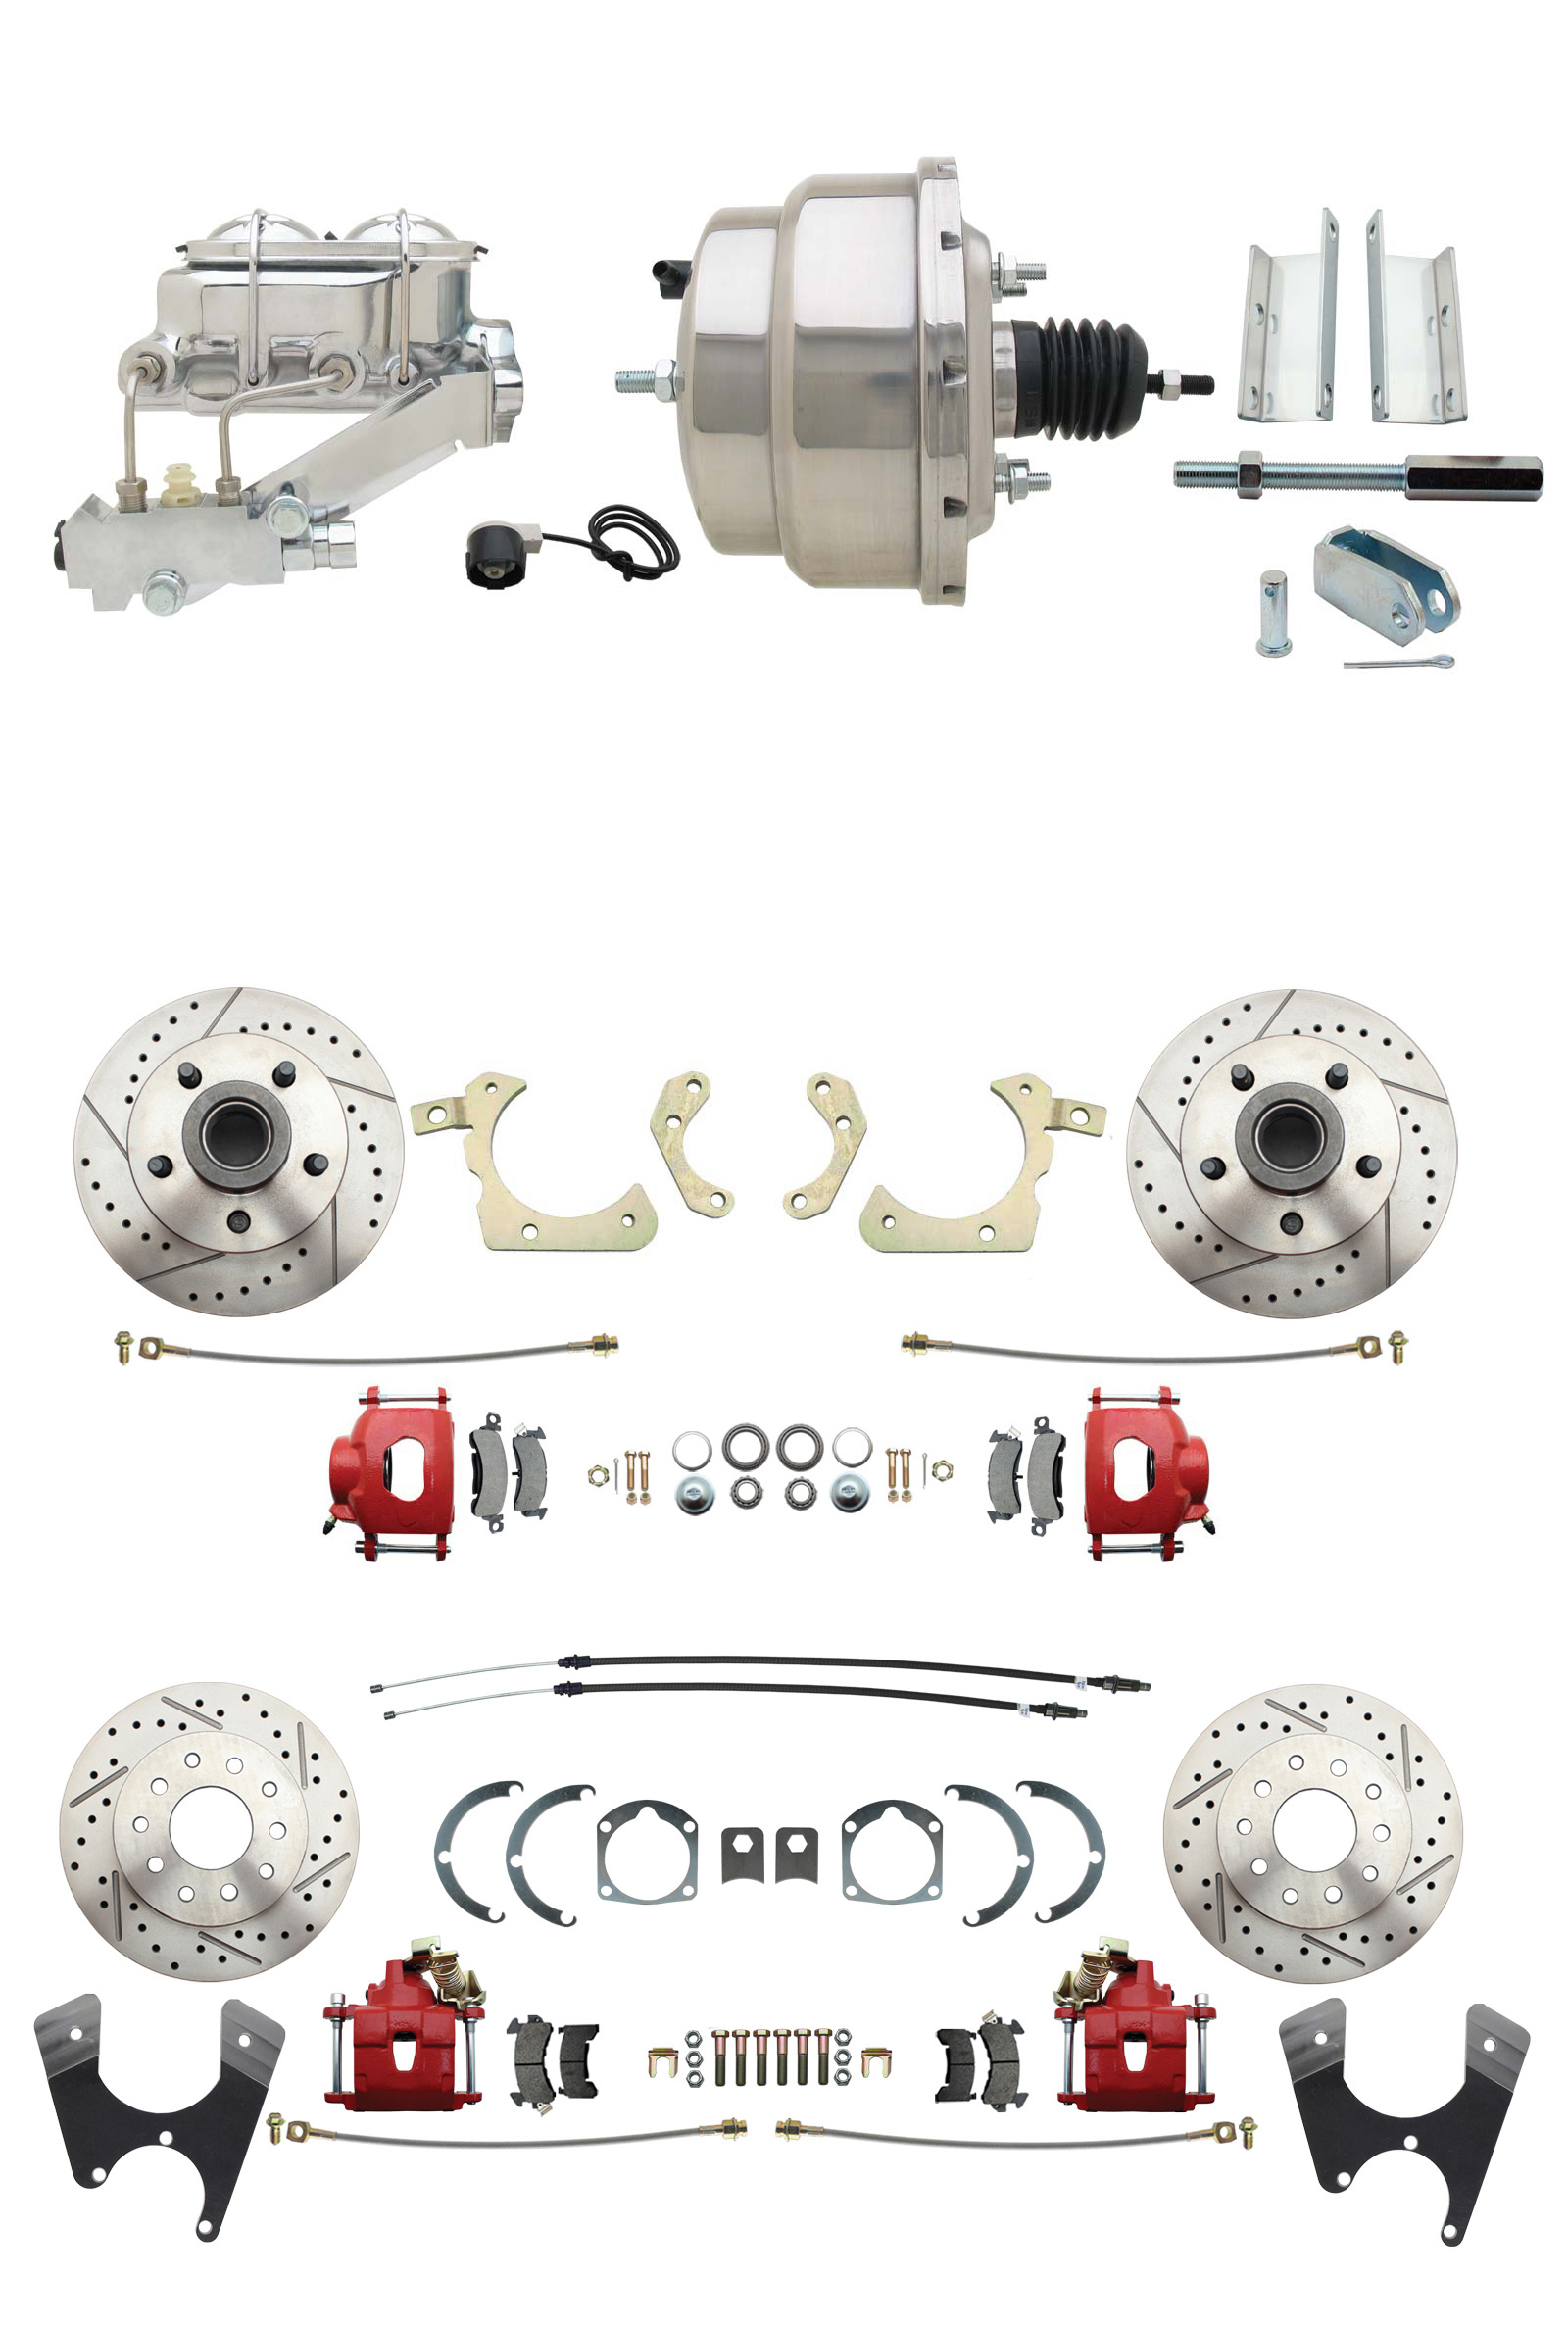 1955-1958 GM Full Size Front & Rear Power Disc Brake Kit Red Powder Coated Calipers Drilled/Slotted Rotors (Impala, Bel Air, Biscayne) & 8 Dual Chrome Booster Conversion Kit W/ Chrome Master Cylinder Left Mount Disc/ Di